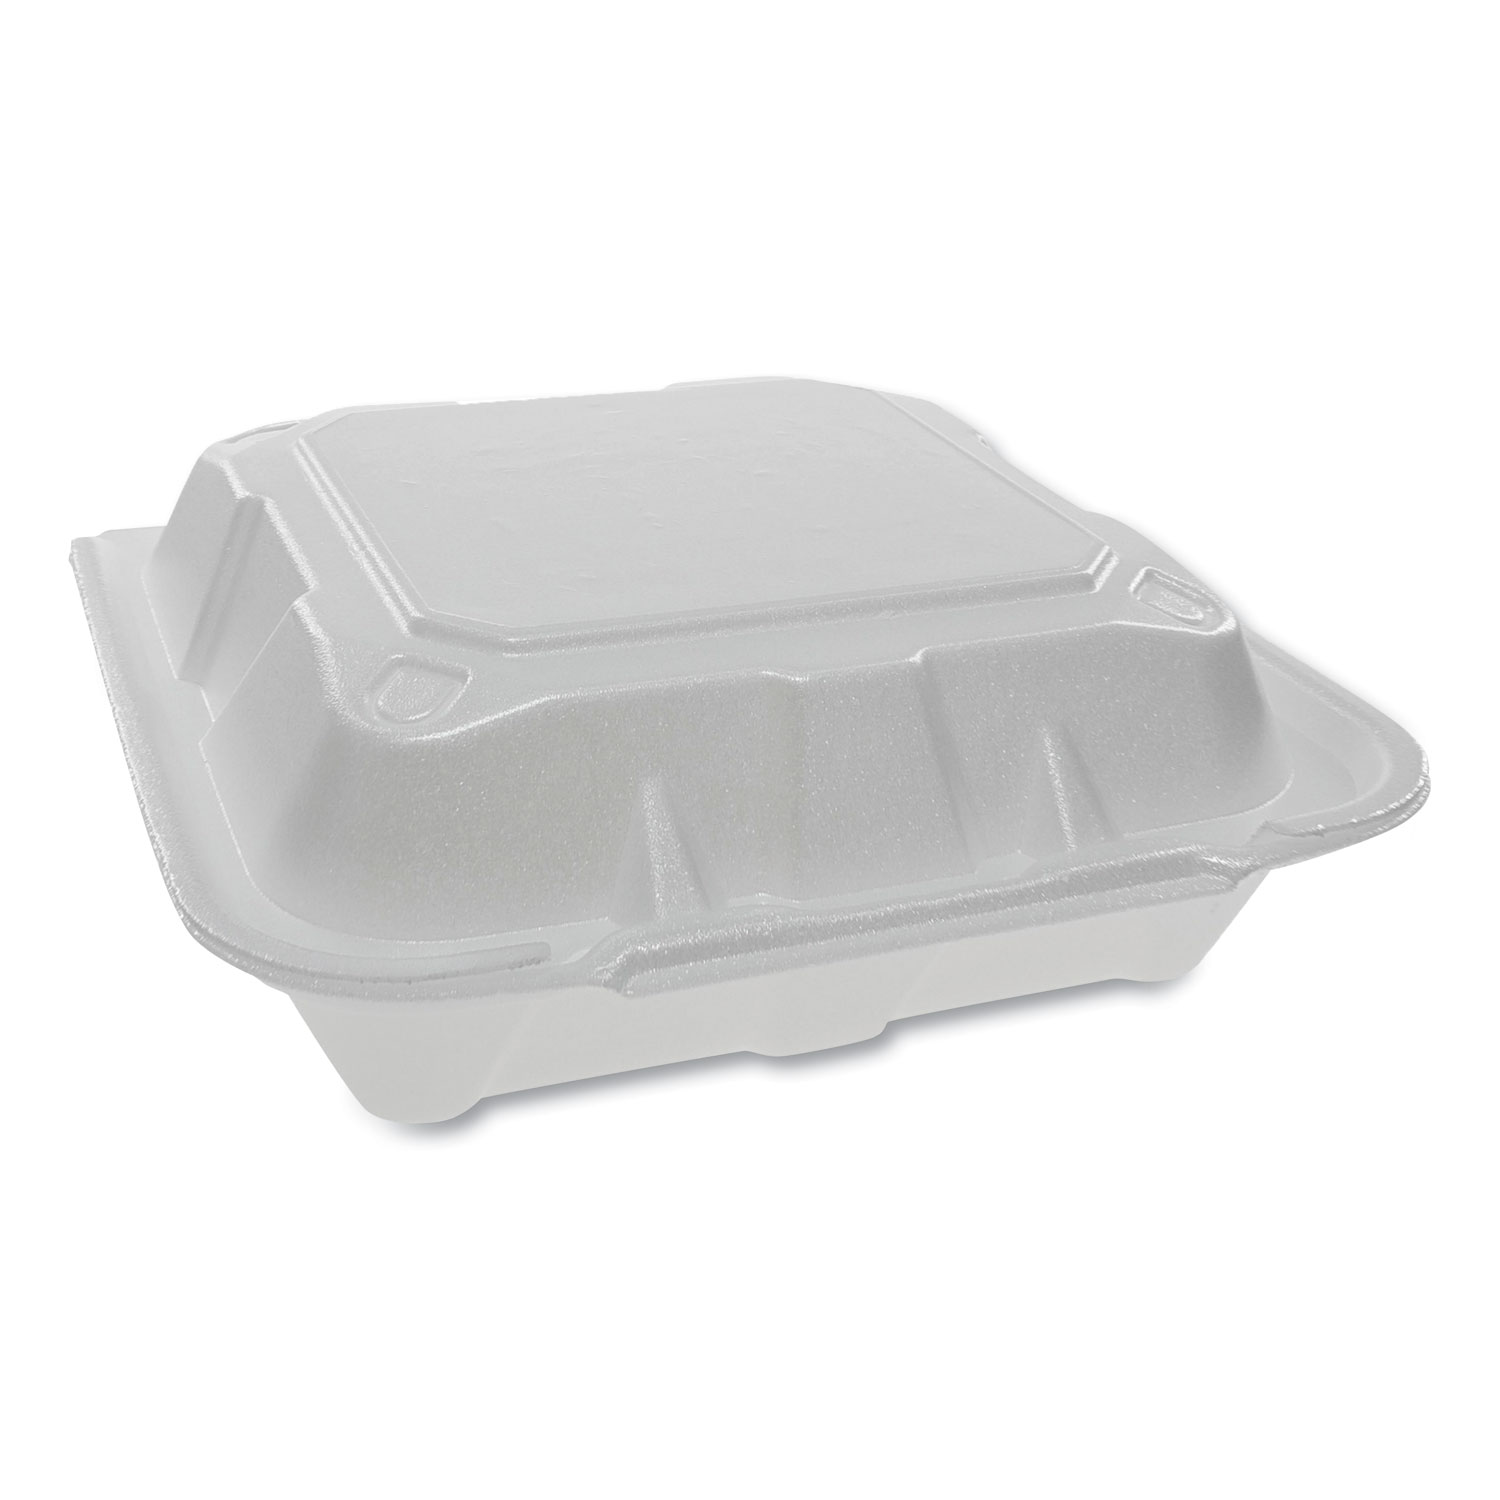  Pactiv YTD188010000 Foam Hinged Lid Containers, Dual Tab Lock, 8.42 x 8.15 x 3, 1-Compartment, White, 150/Carton (PCTYTD188010000) 